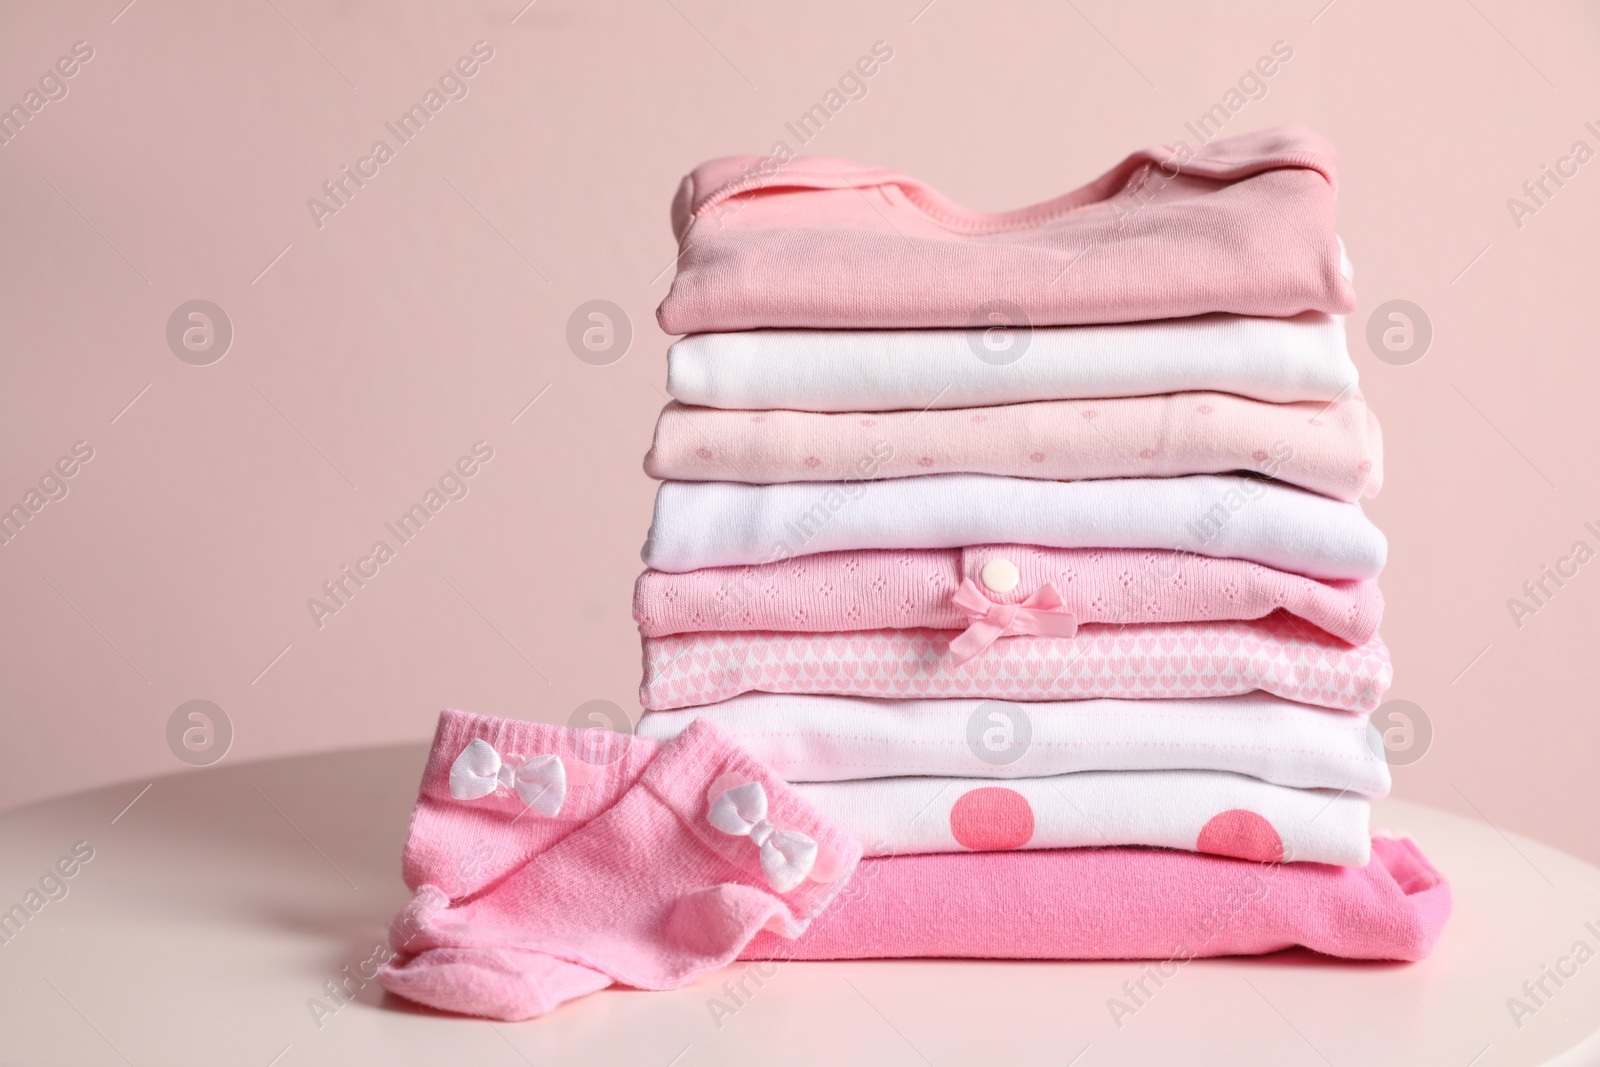 Photo of Stack of clean girl's clothes and socks on table